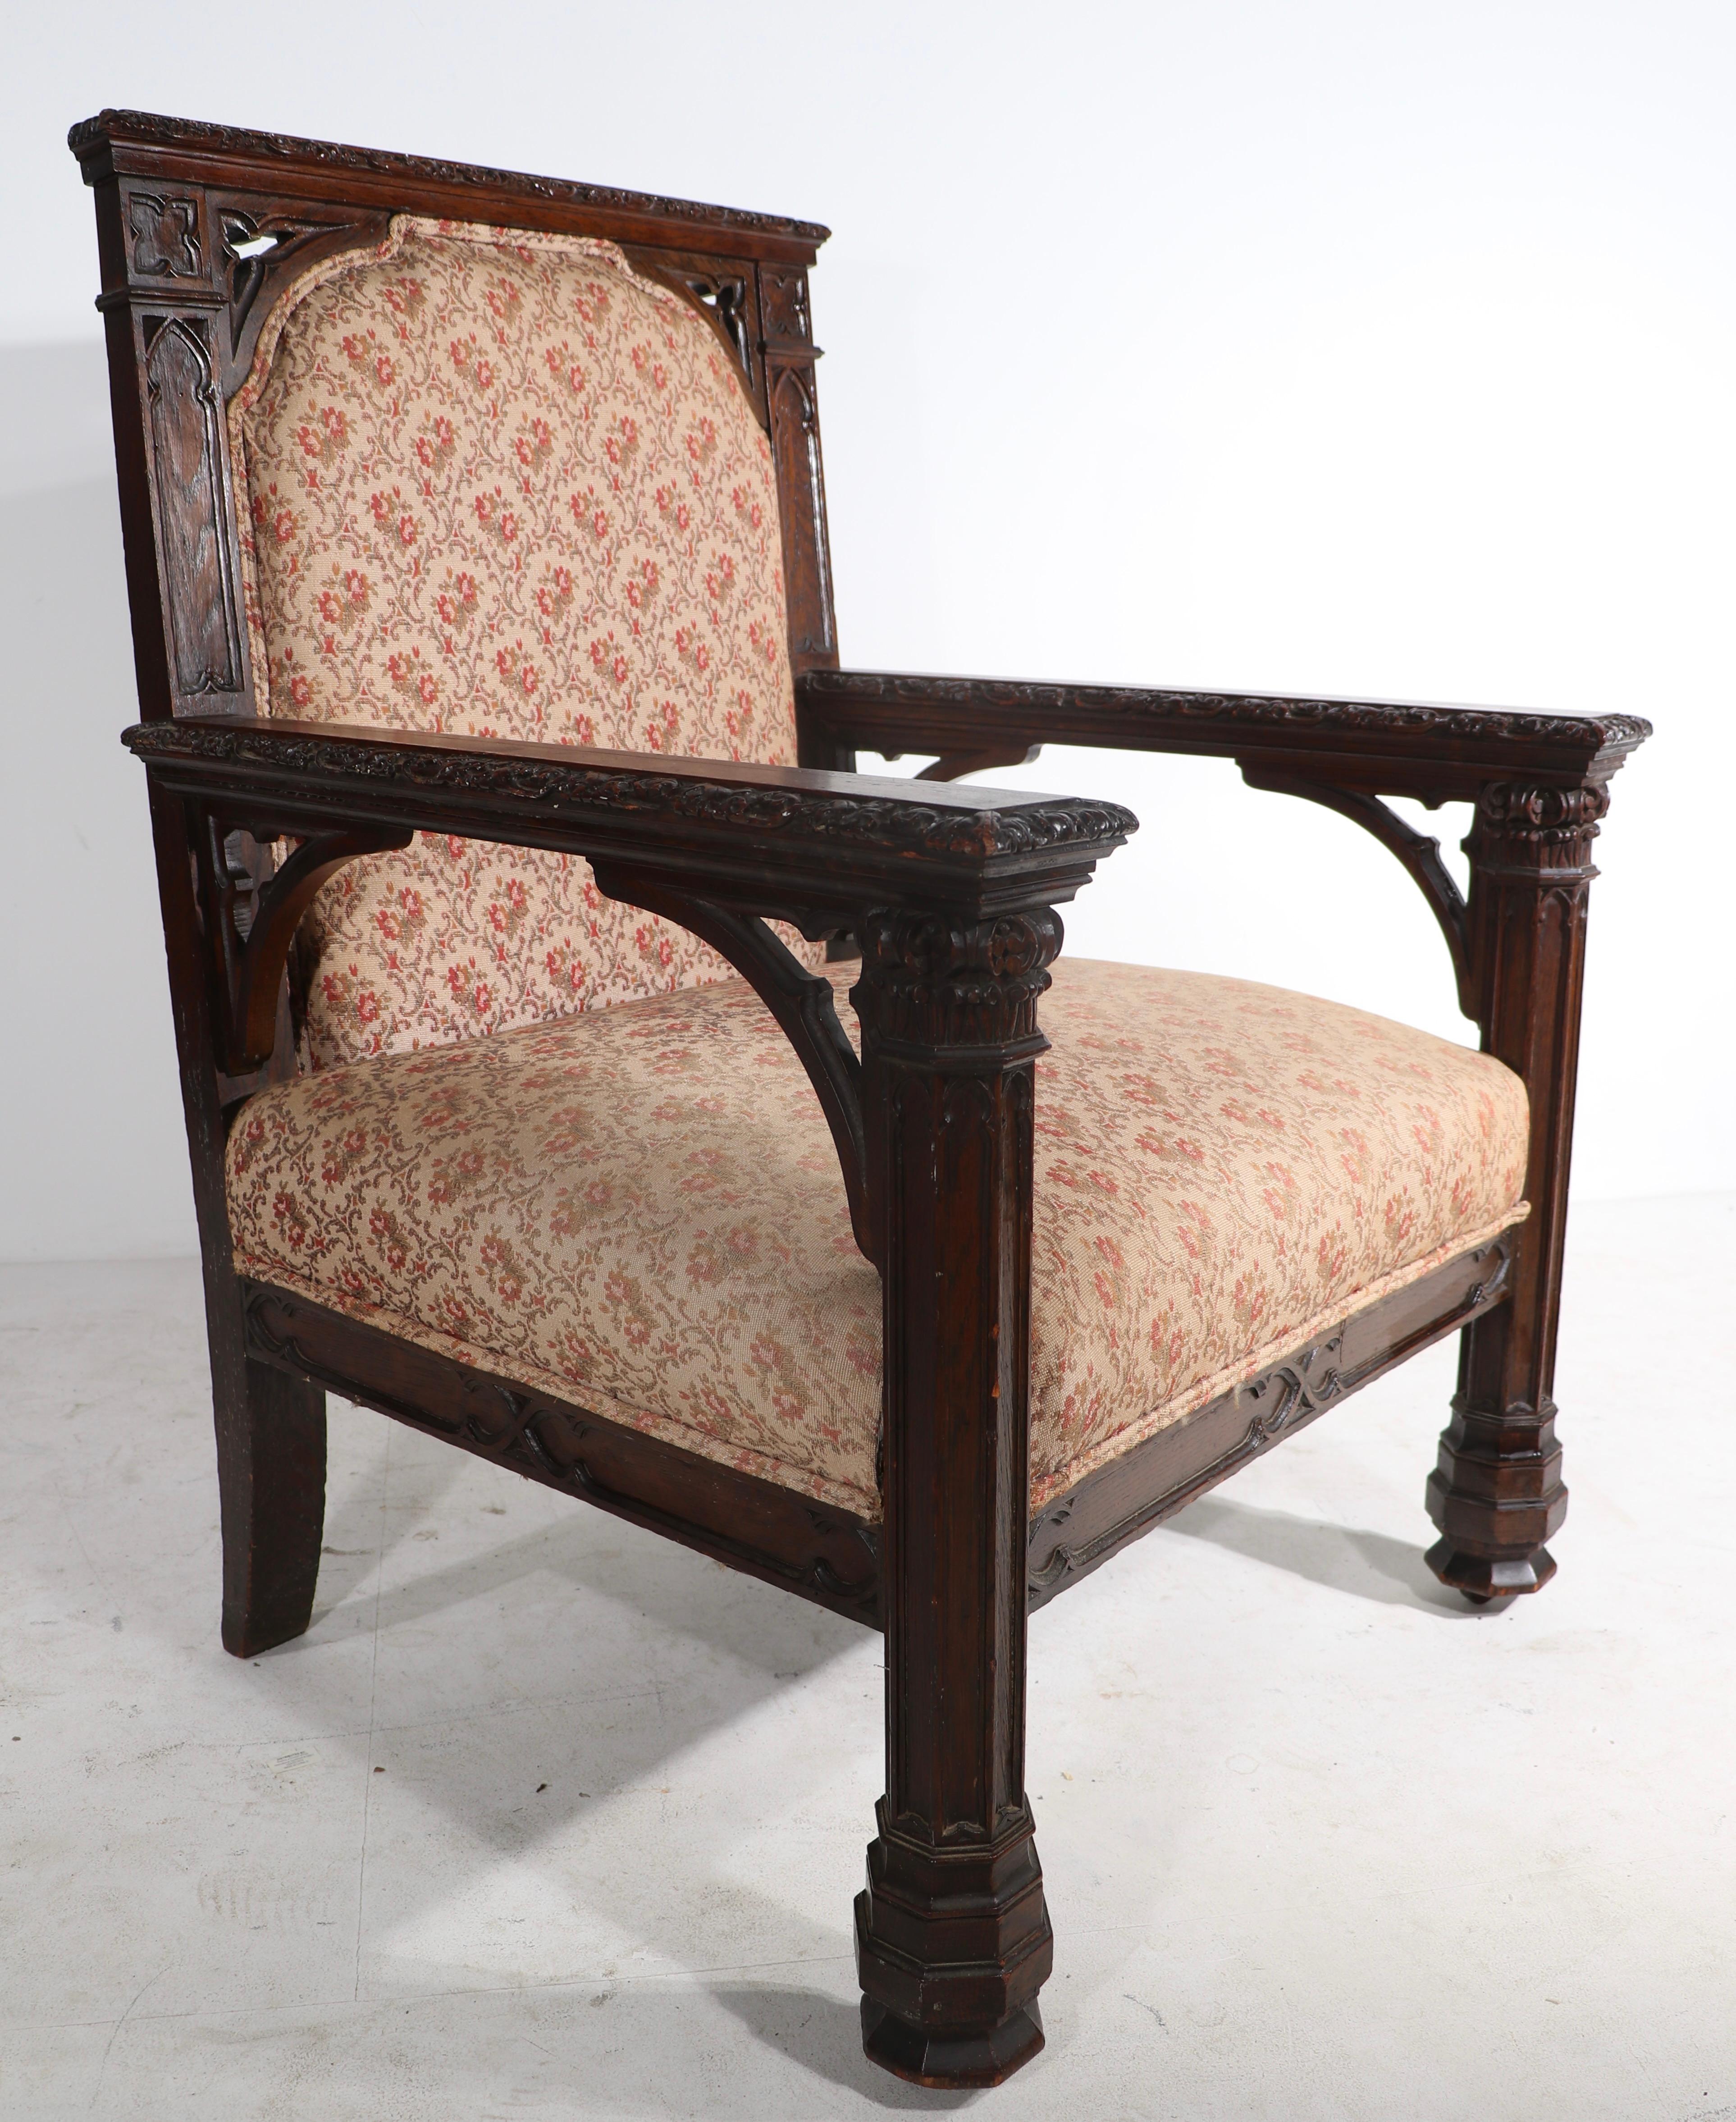 19th Century Oversized Gothic Revival Throne Armchair For Sale